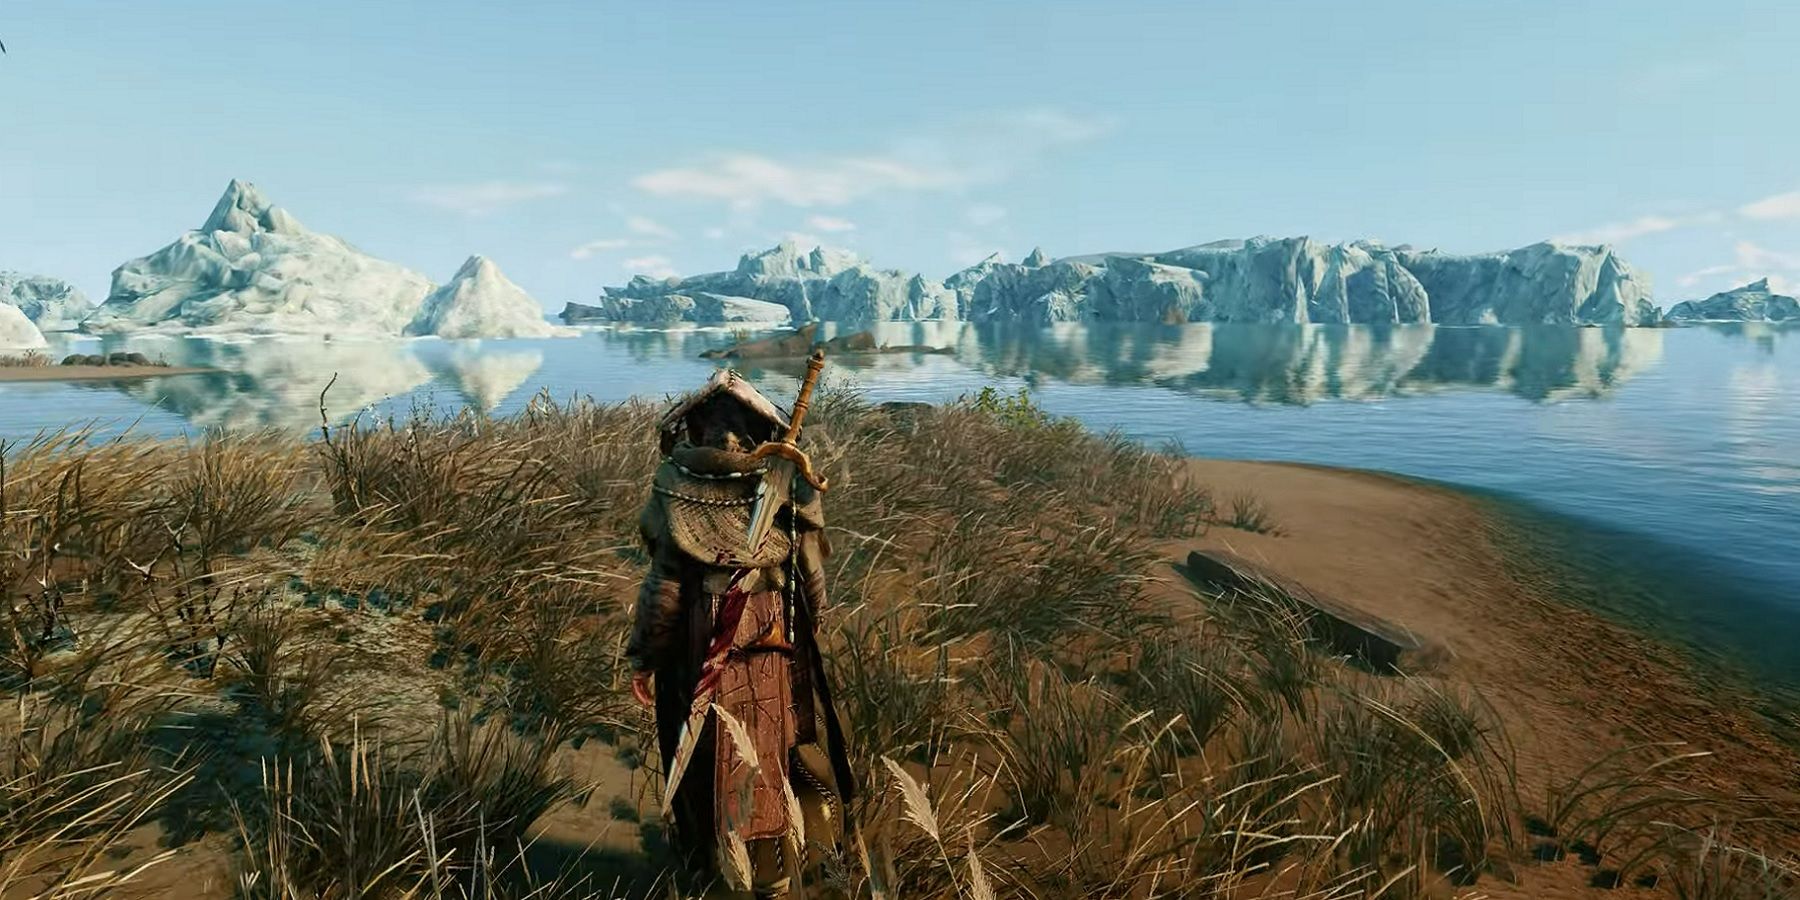 Image from Skyrim showing the player looking out into a body of water with an icy tundra in the distance.